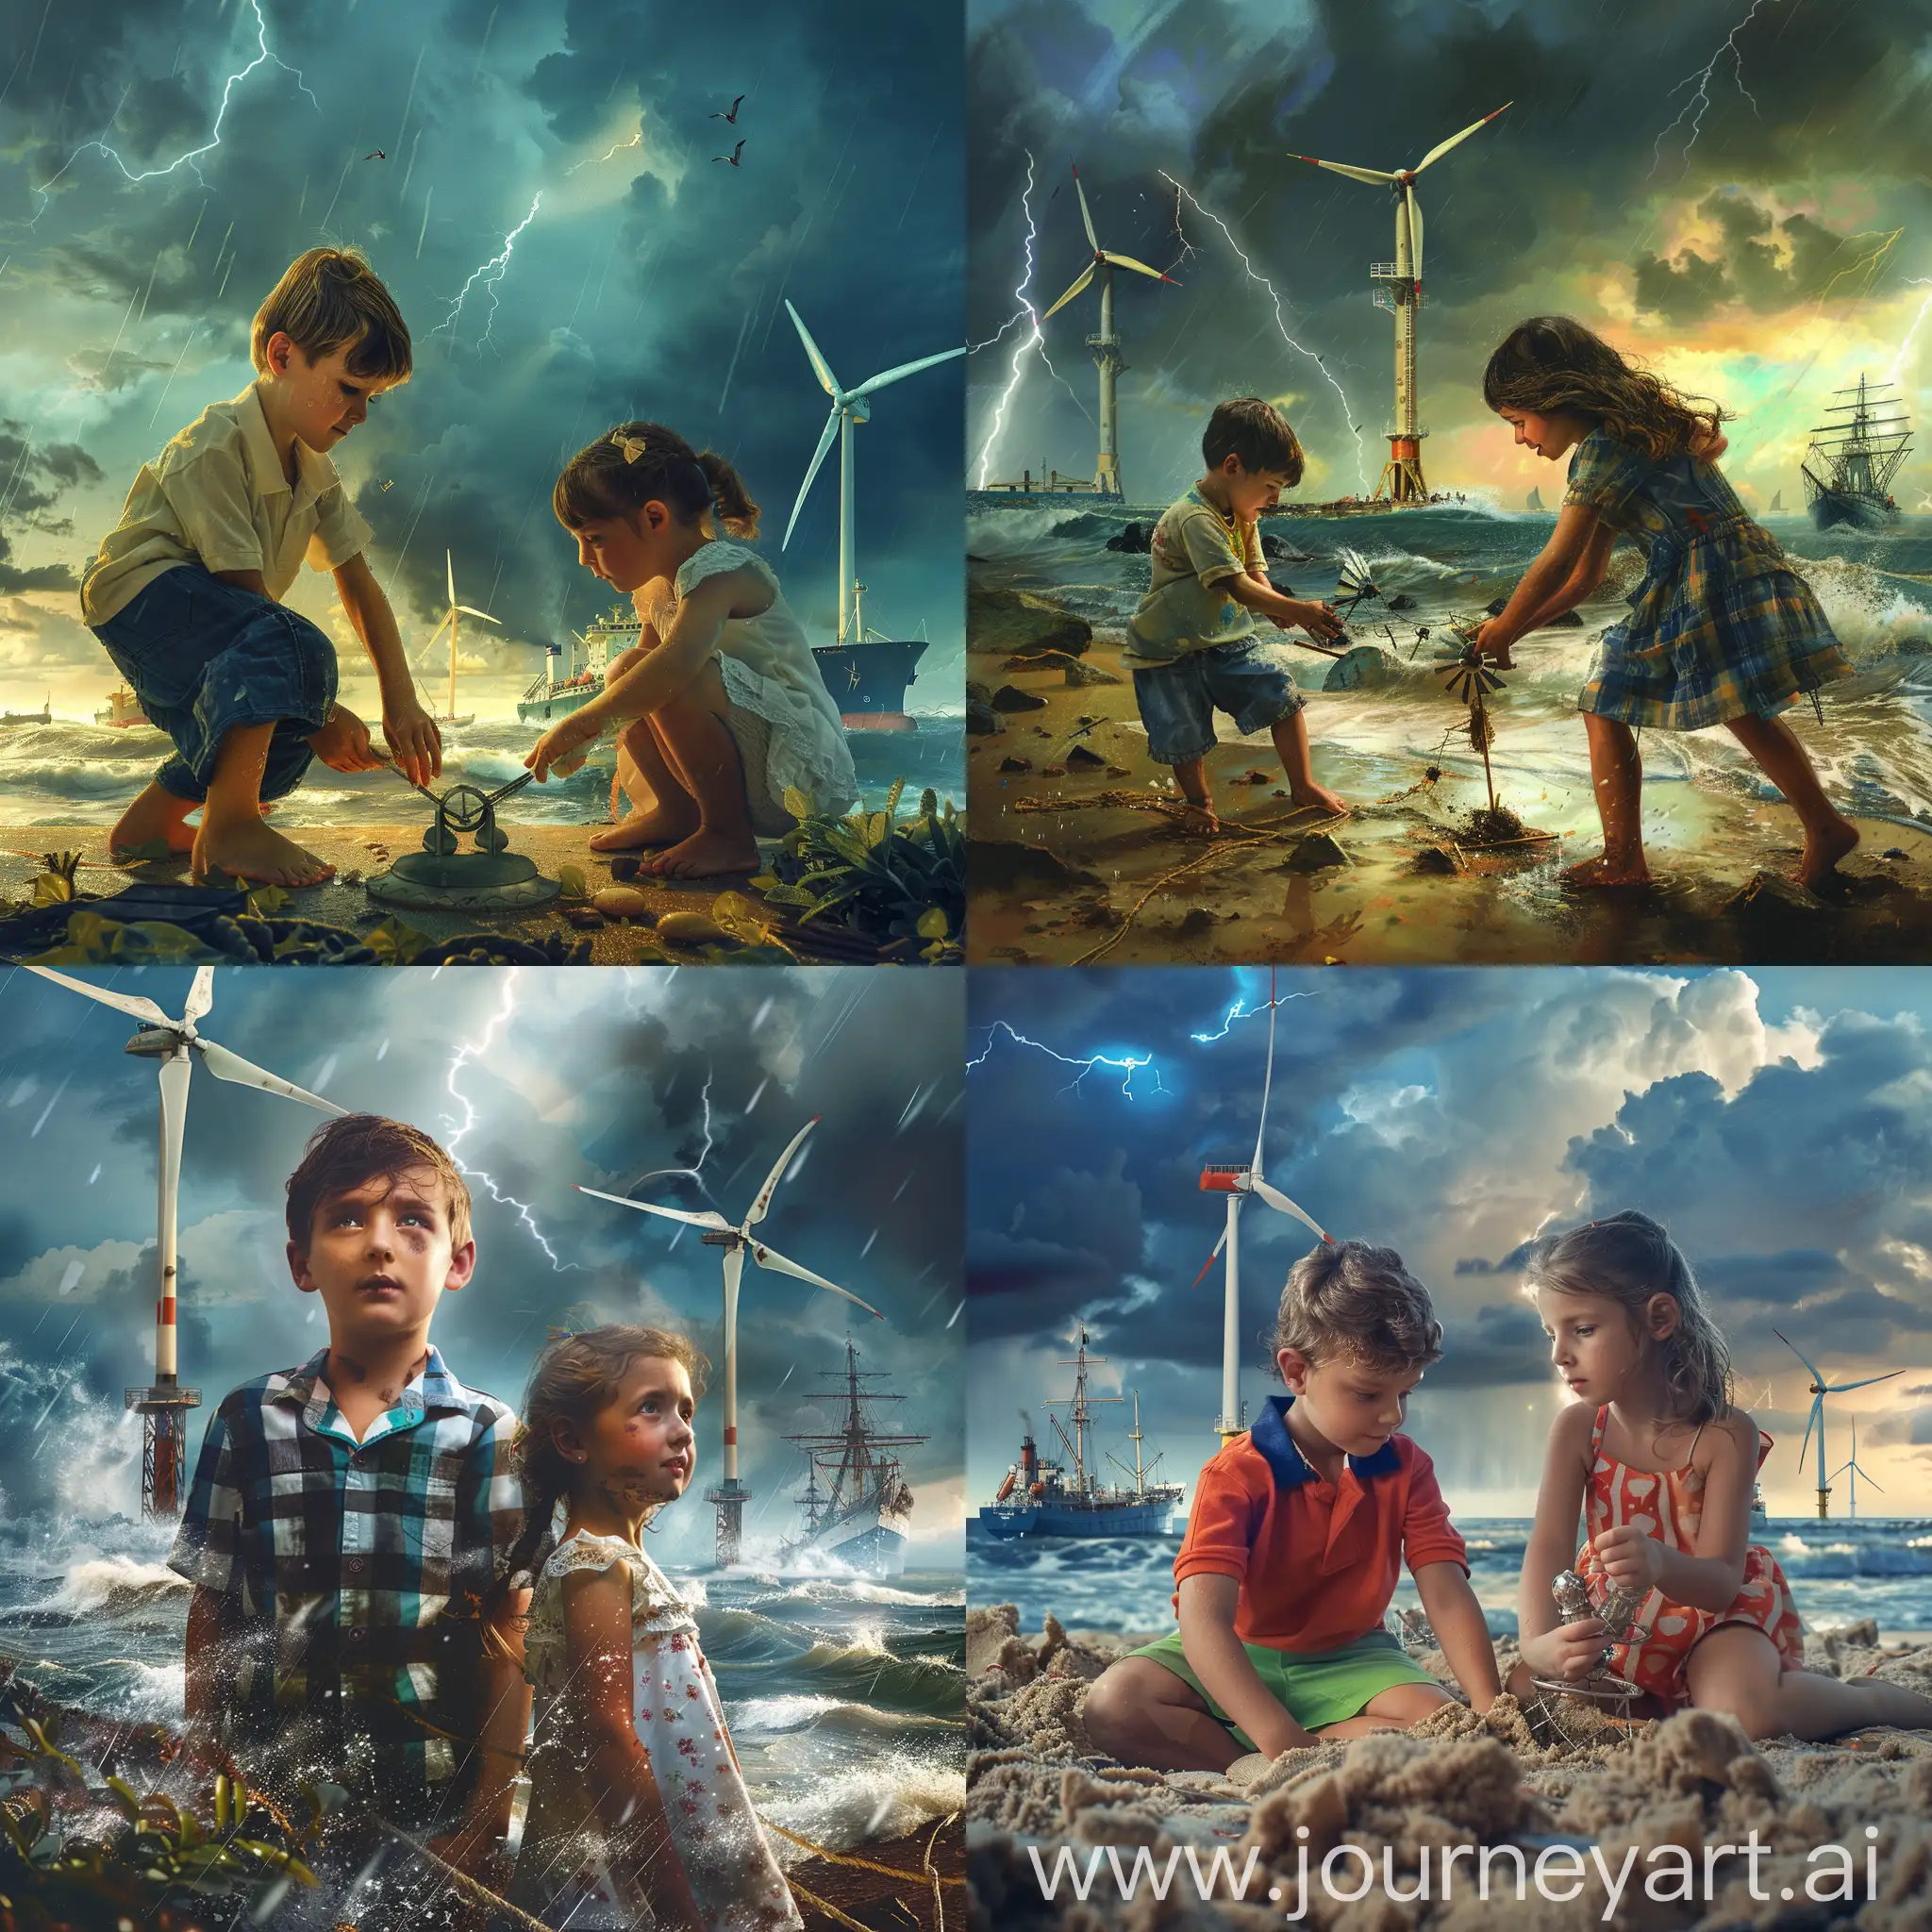 Children-Playing-with-Windmills-by-the-Sea-Amidst-Thunderstorms-and-Ships